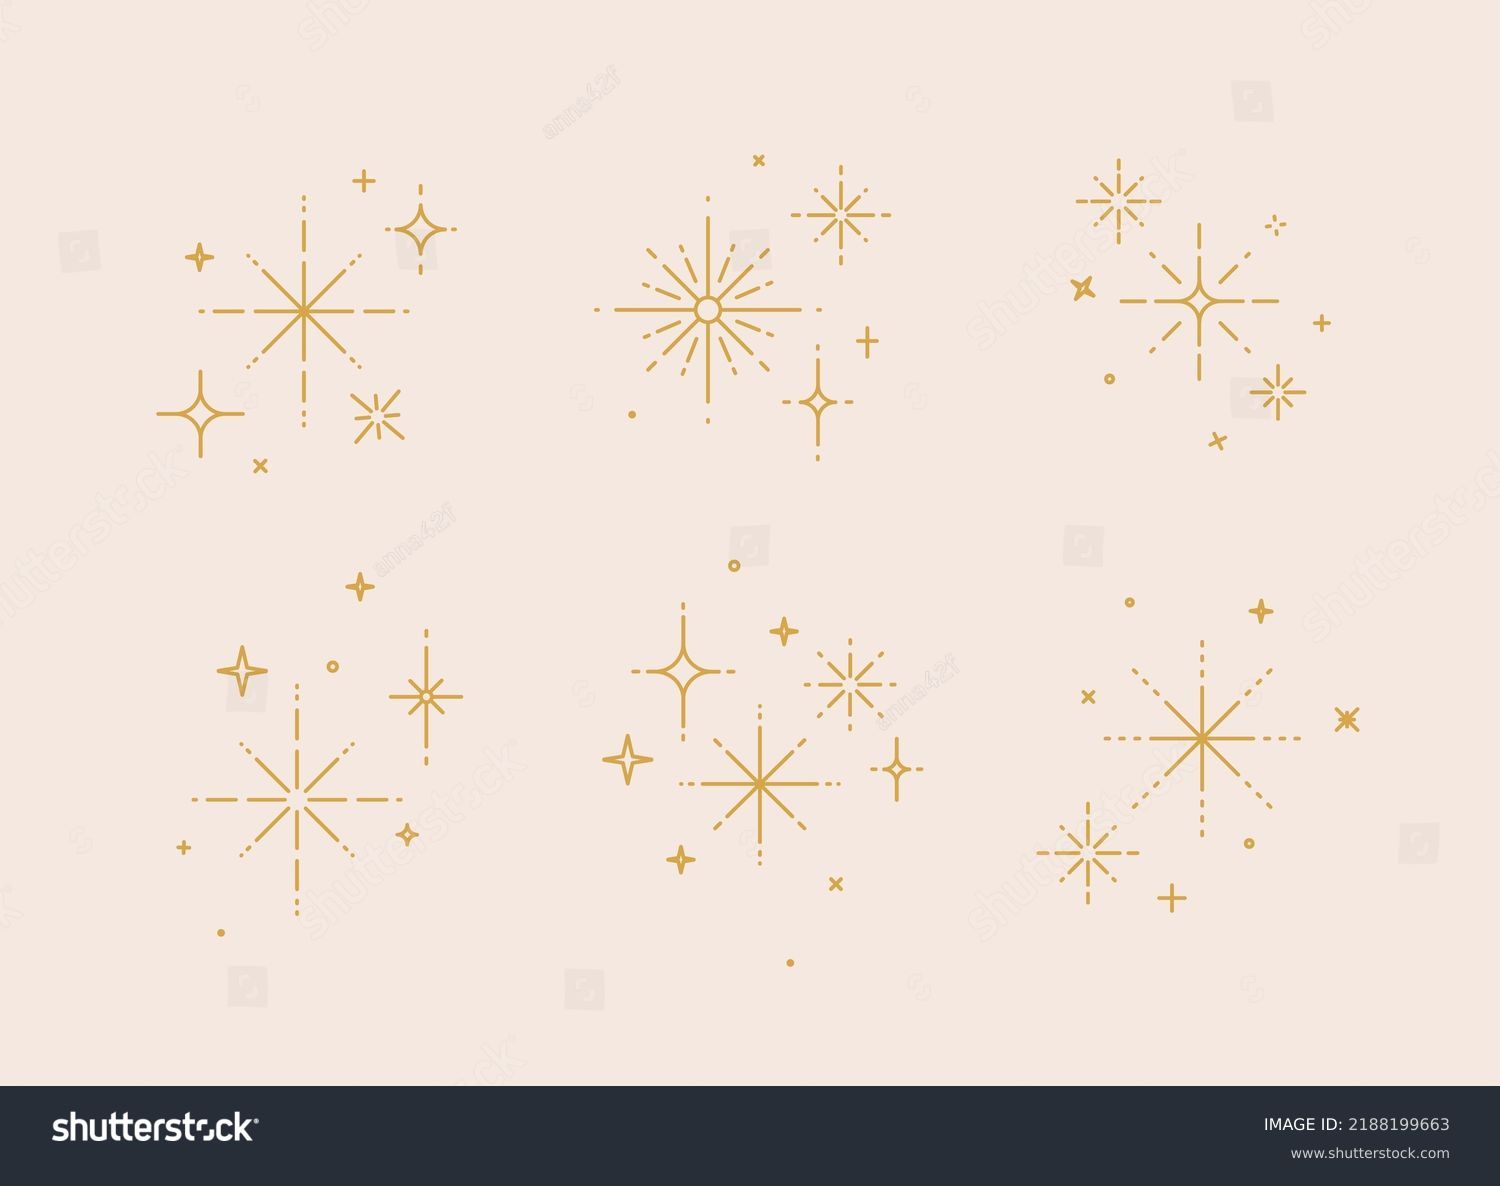 Clink splashes, stars, glowing in flat line art deco style drawing on beige background #2188199663